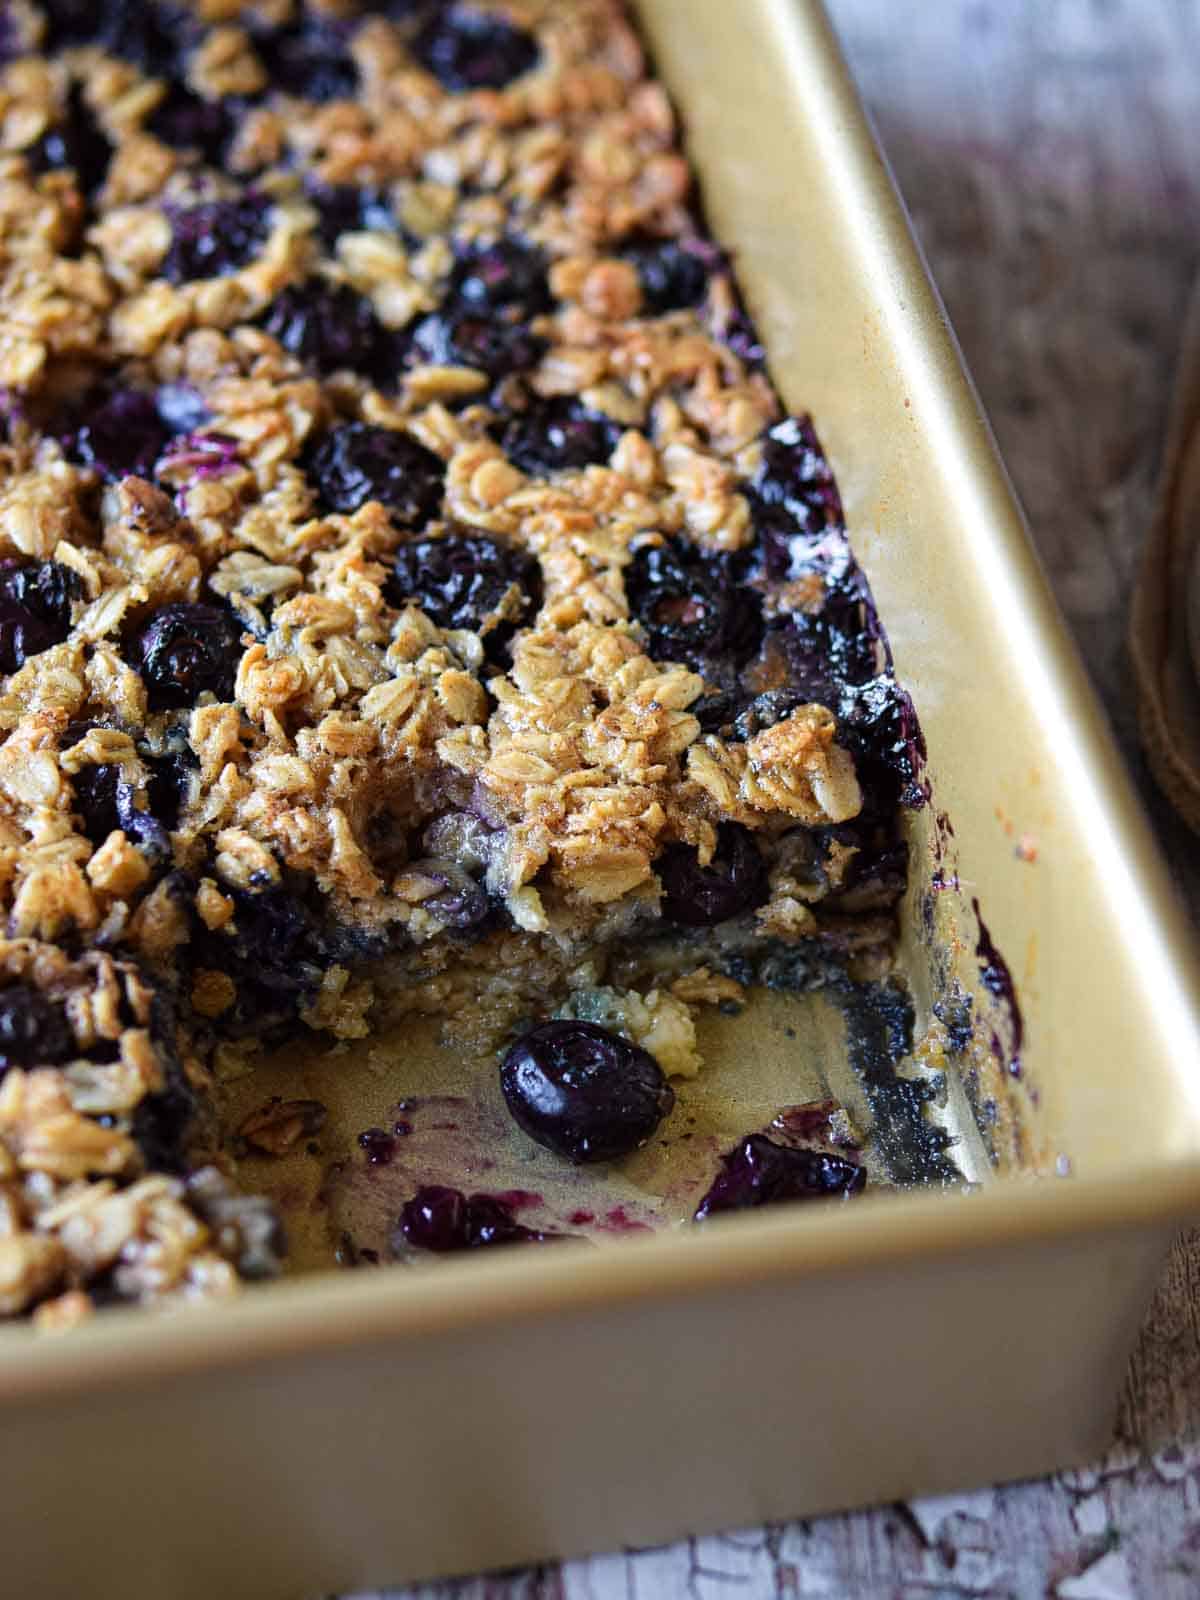 Baked blueberry oatmeal in a baking pan with a slice cut out.